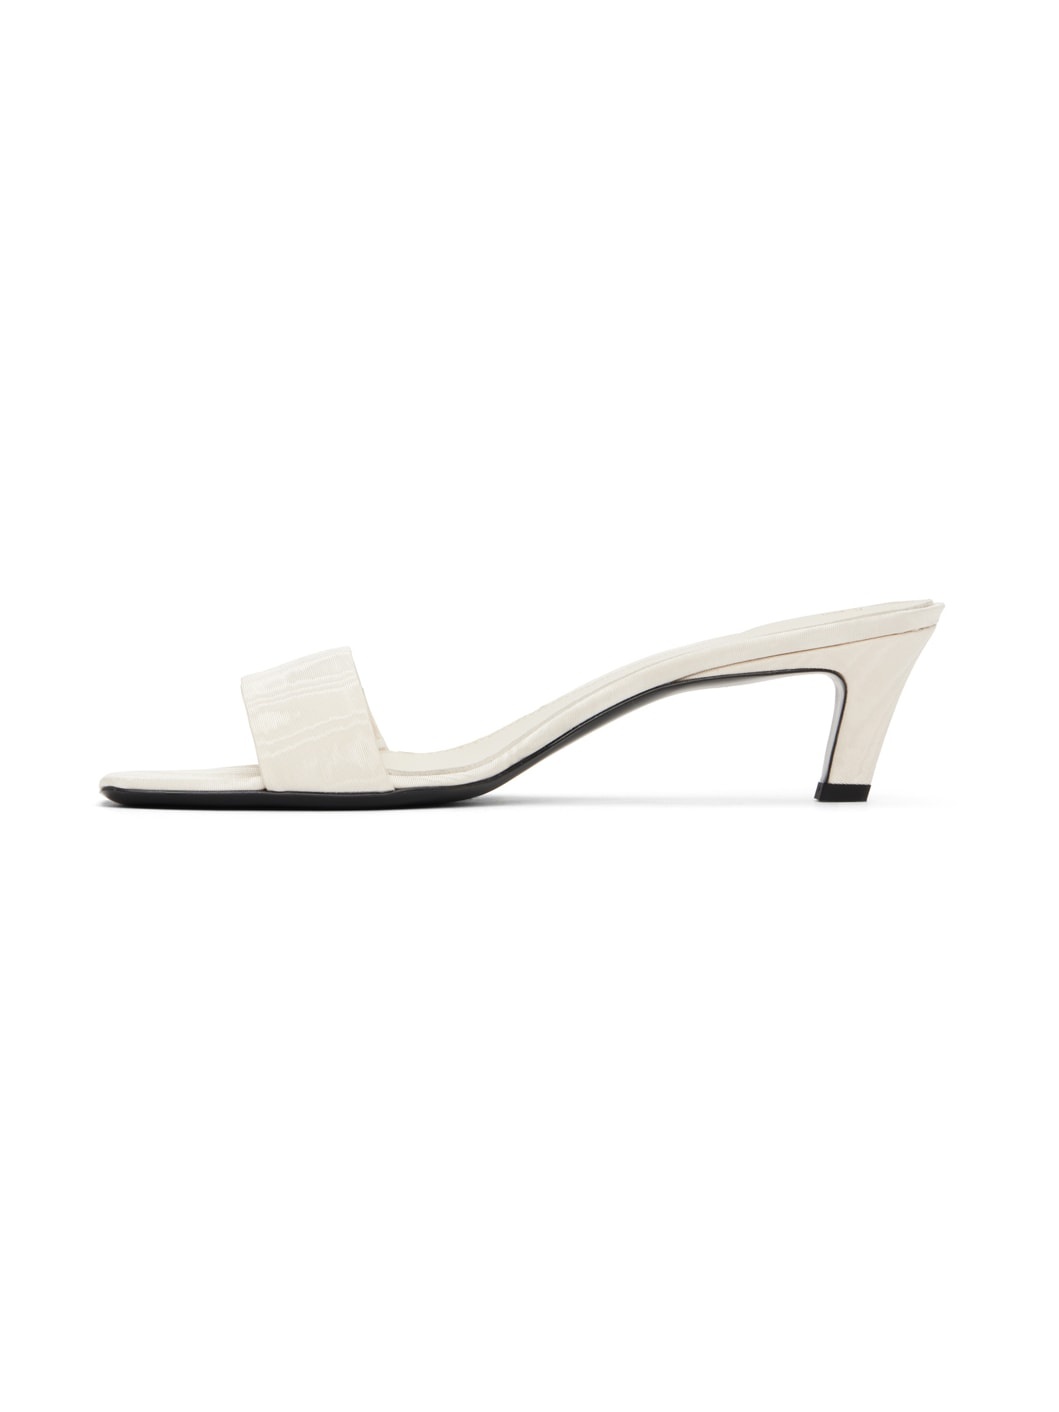 Off-White 'The Mule' Heeled Sandals - 3